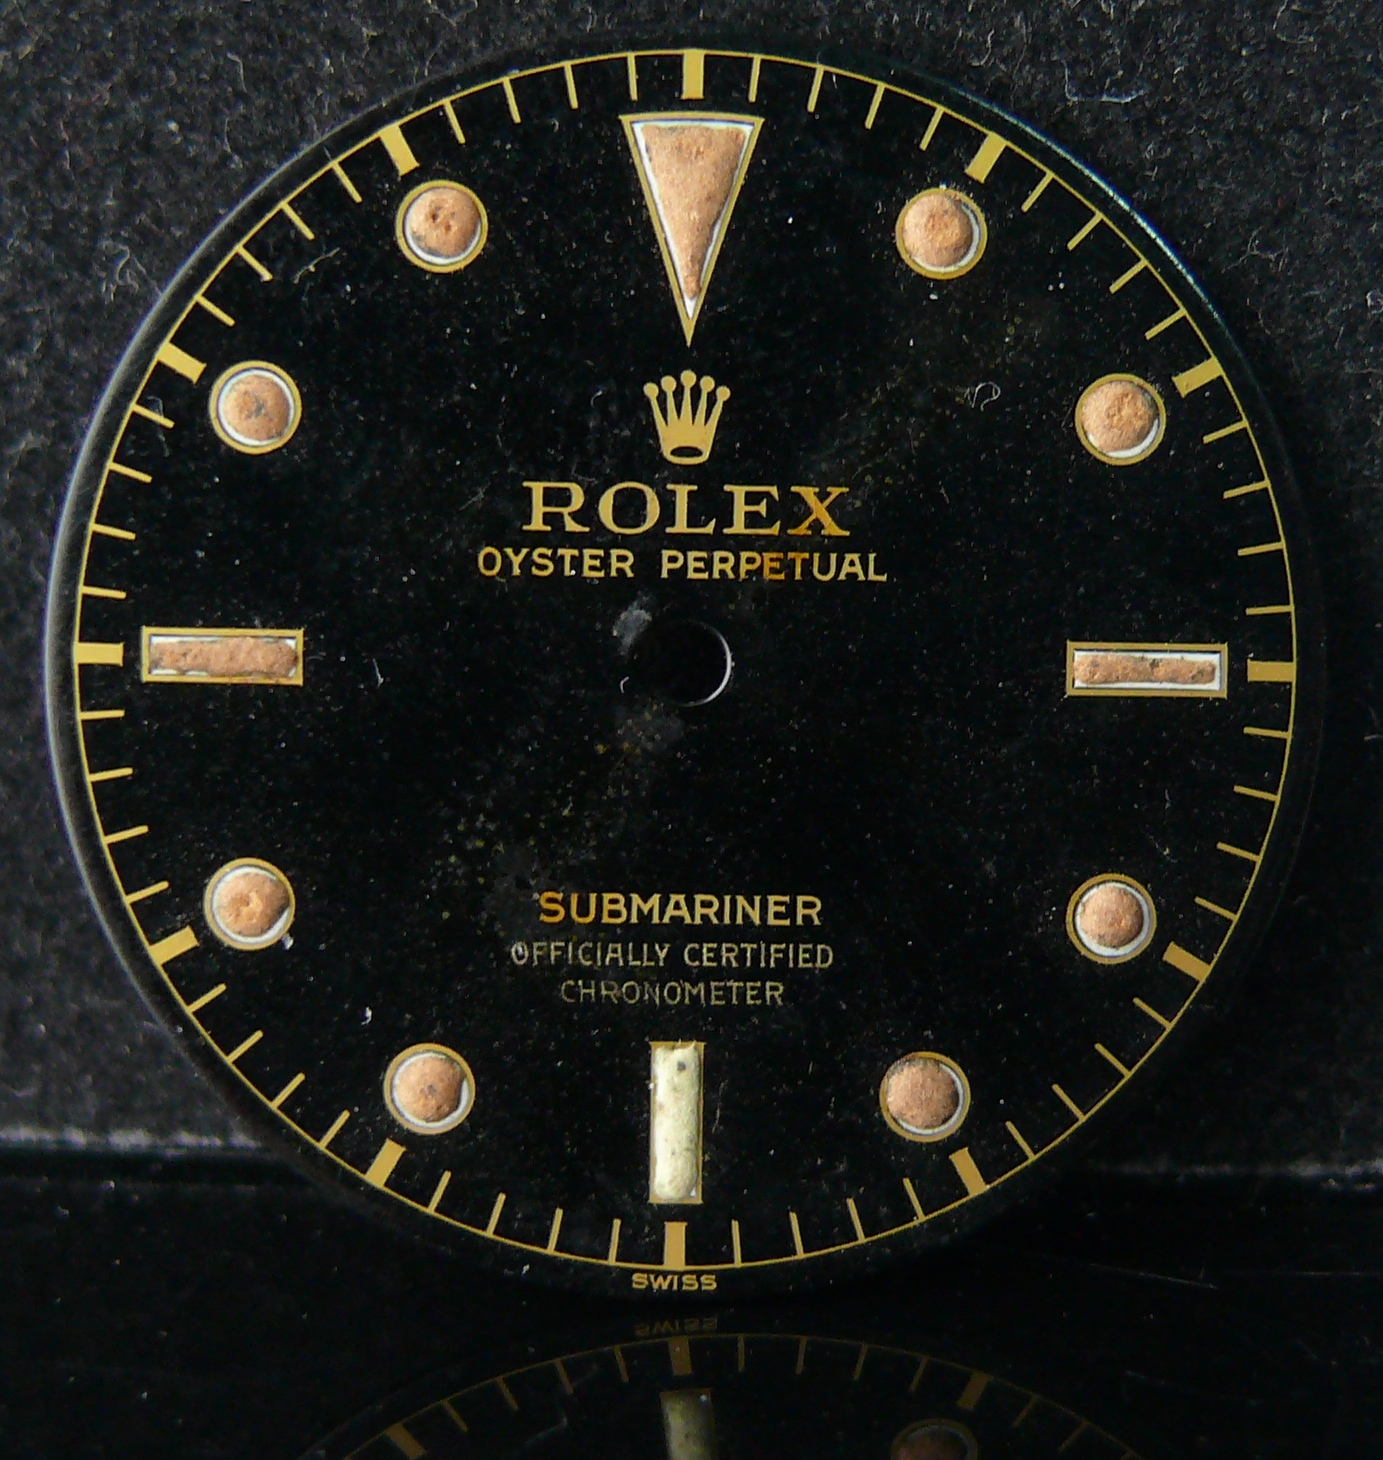 ROLEX SUBMARINER DIAL OFFICIALLY CERTIFIED CHRONOMETER REF 5508 CIRCA 1950s, gloss dial with gilt - Image 7 of 9